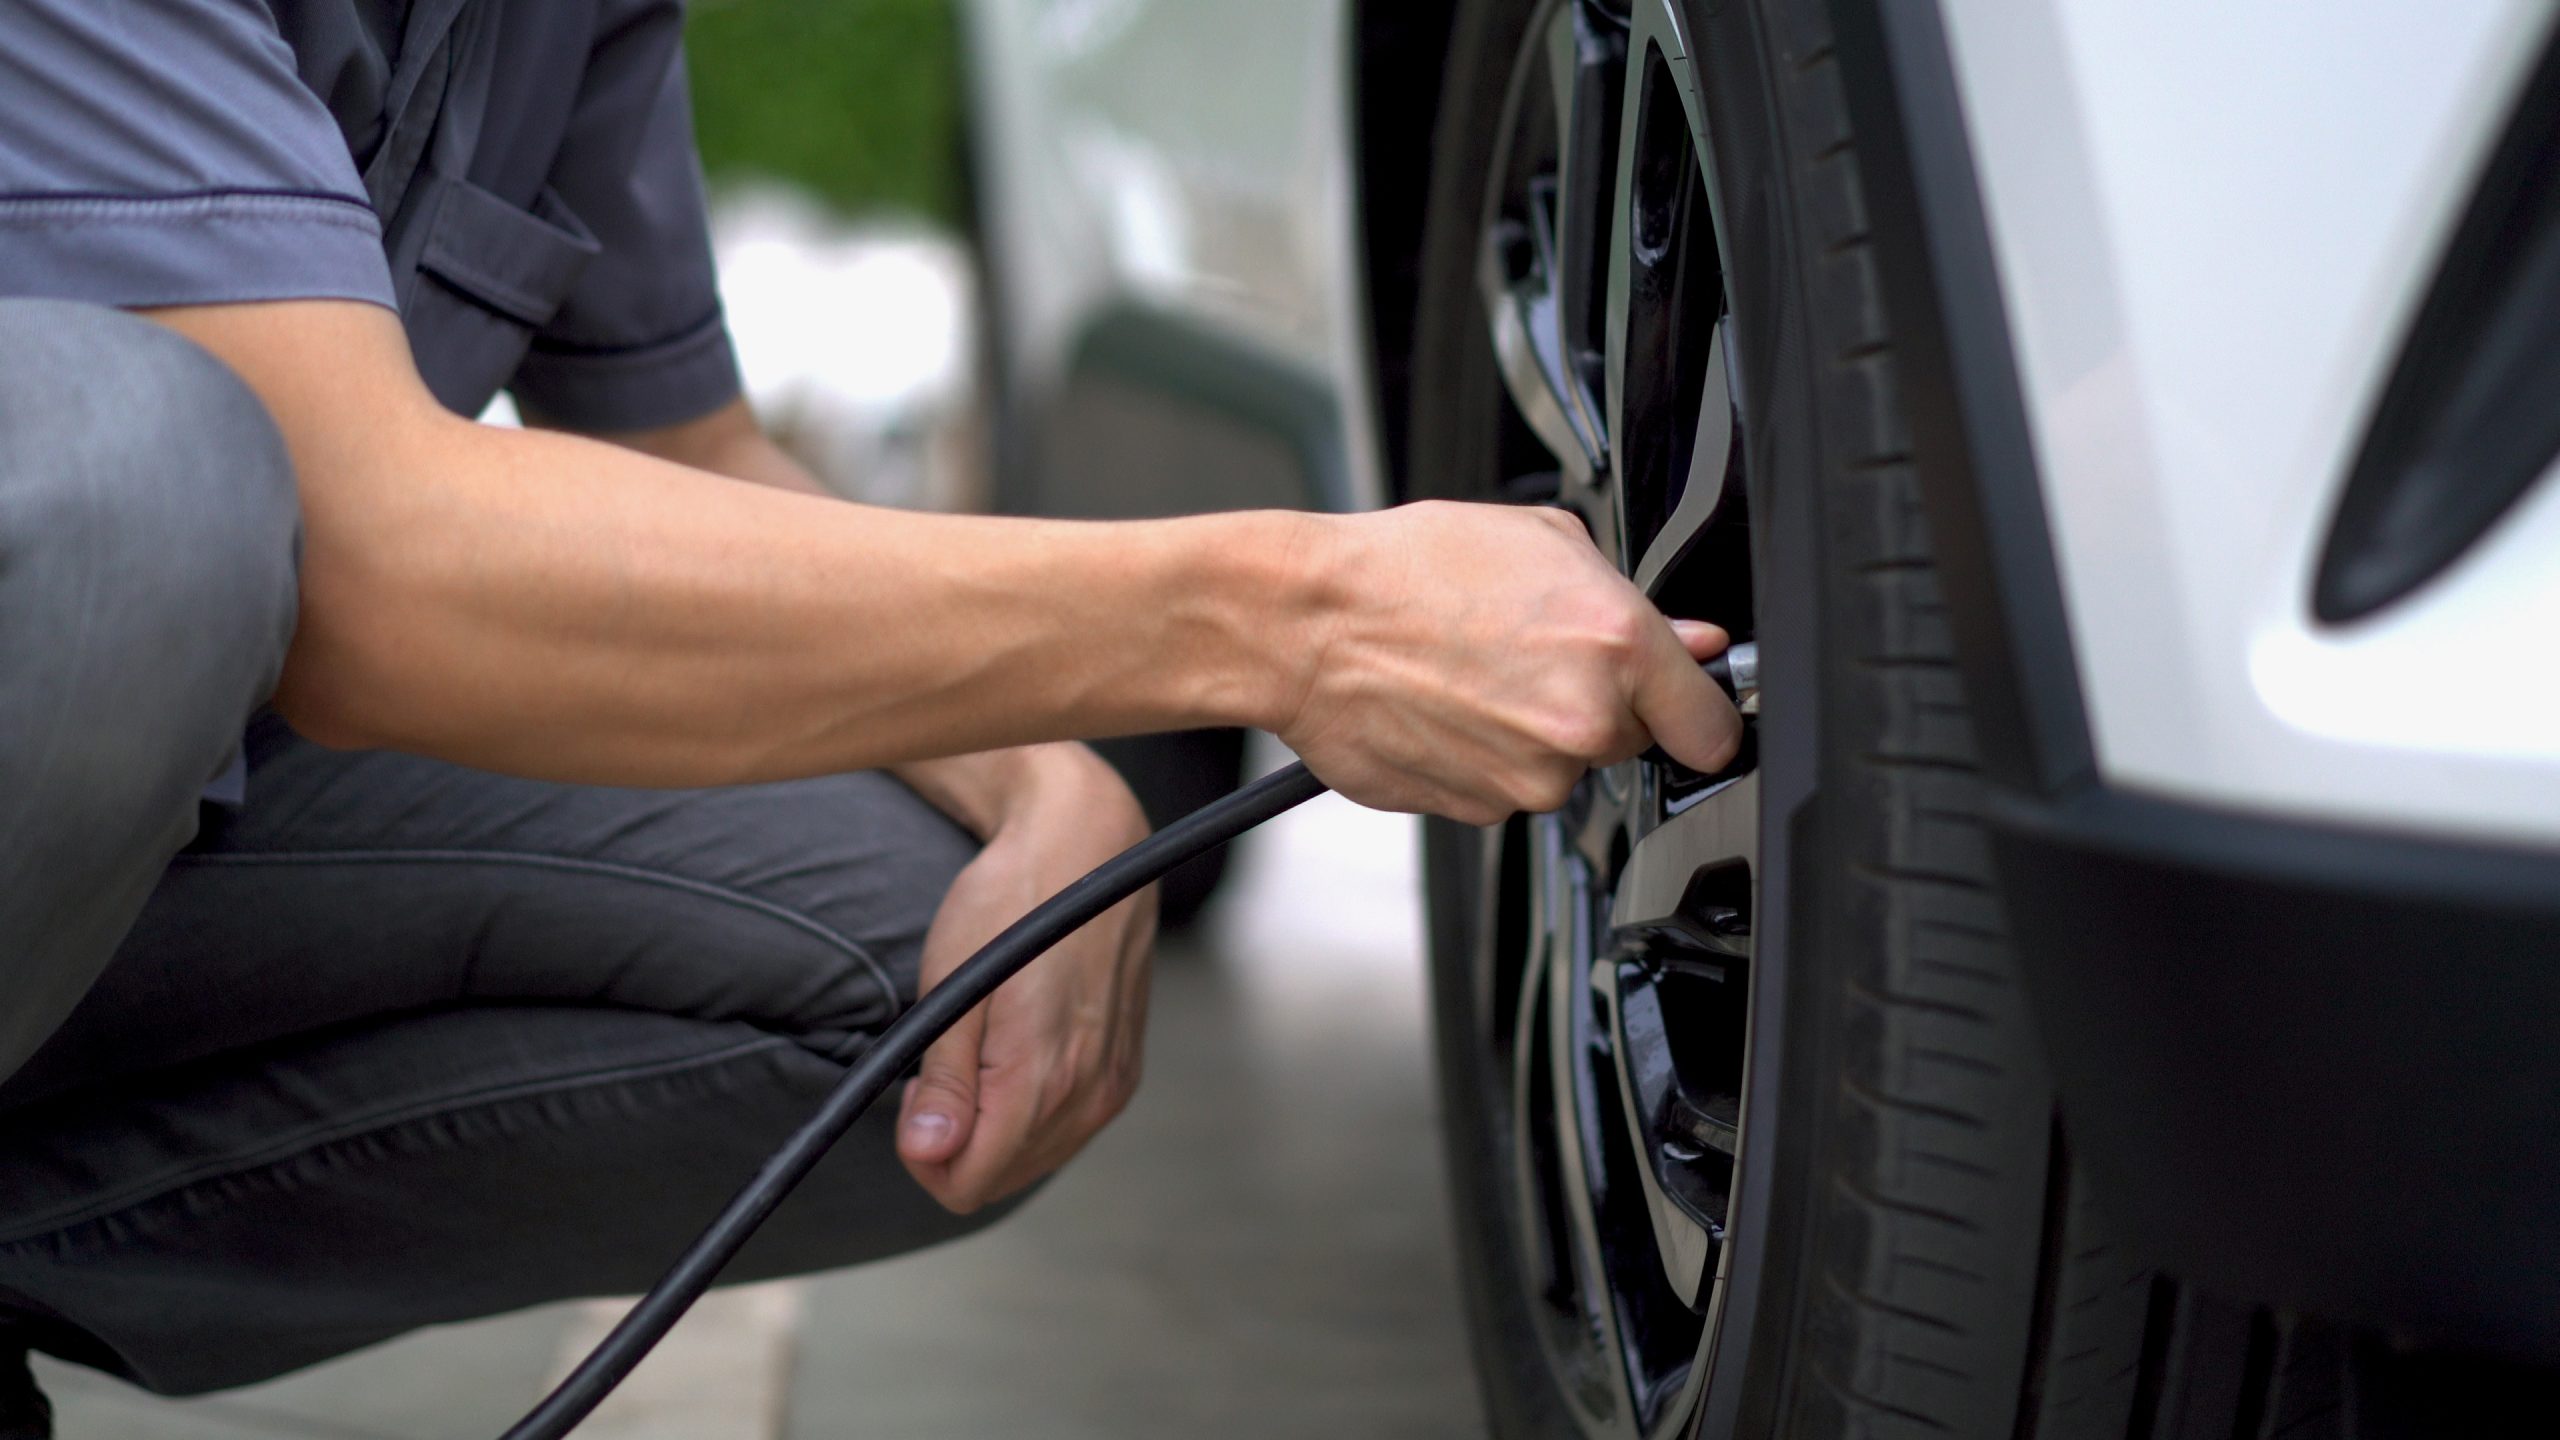 How to save money on your car maintenance - Proper Tire Inflation and Maintenance for Fuel Efficiency